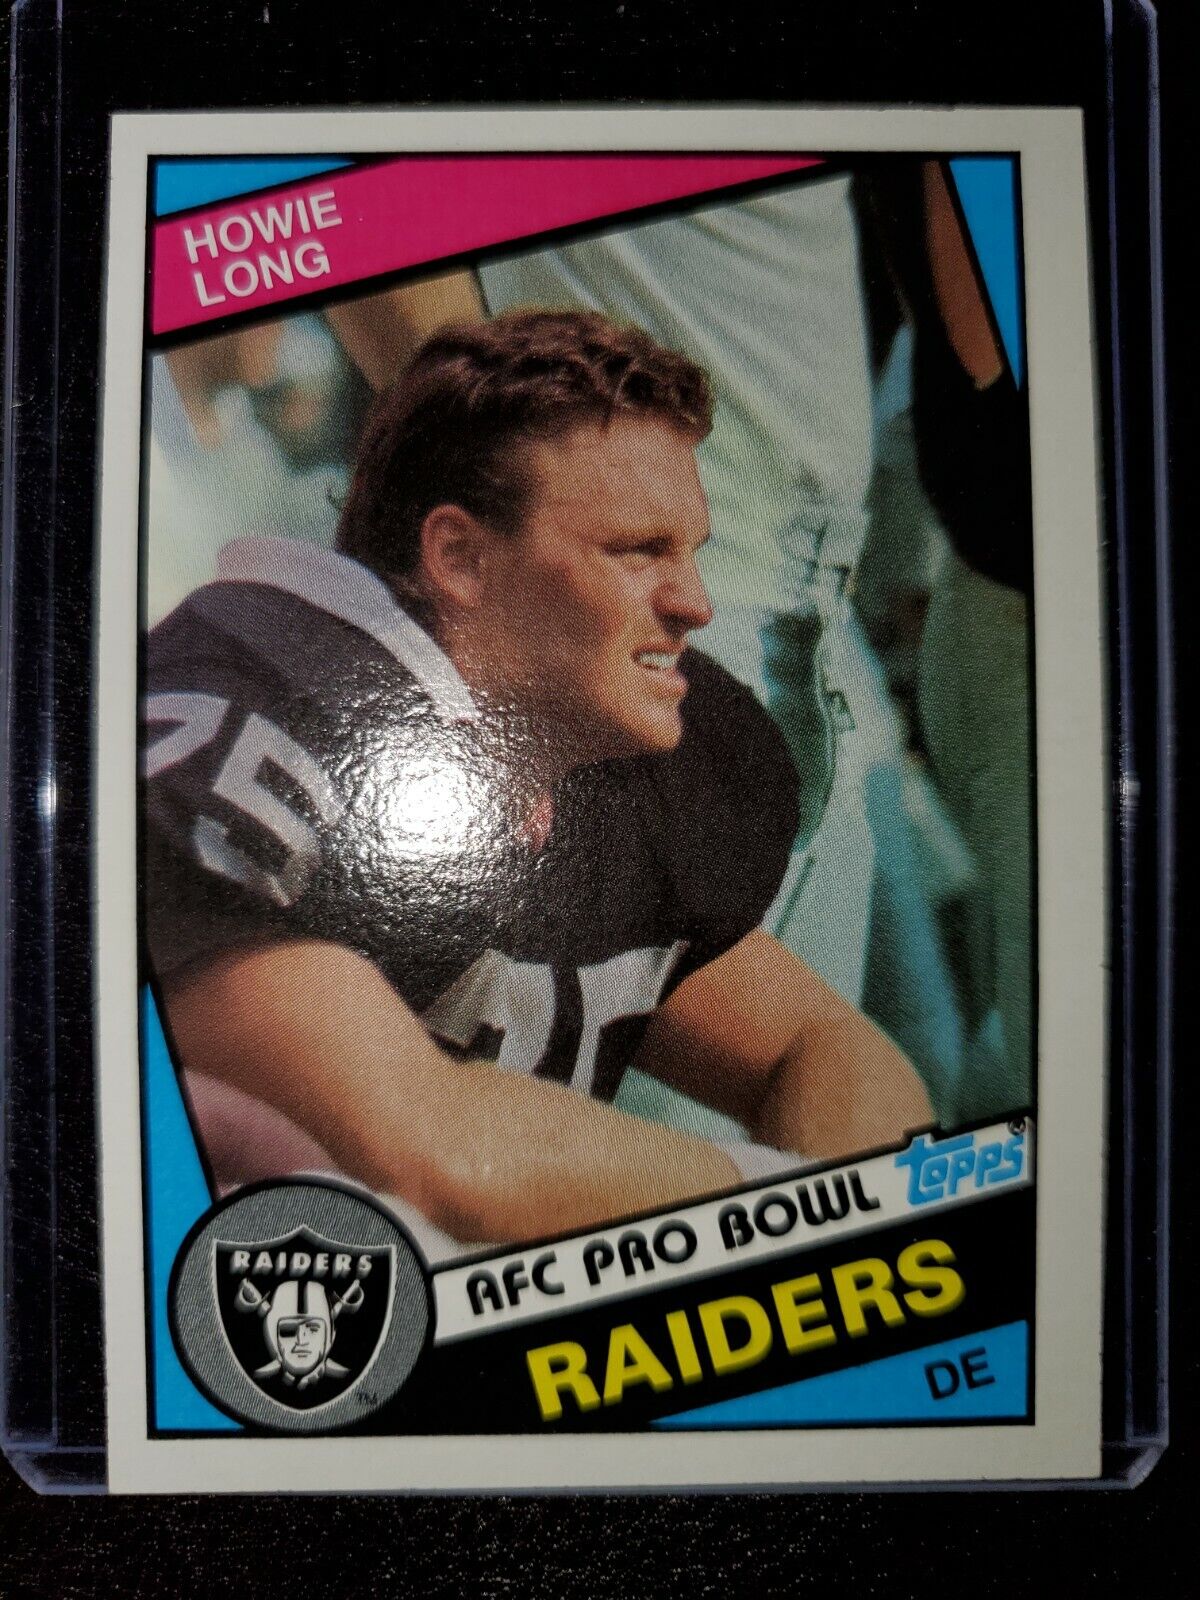 1984 Topps HOWIE LONG Rookie Card #111 RAW FIRE ?? HOF . rookie card picture